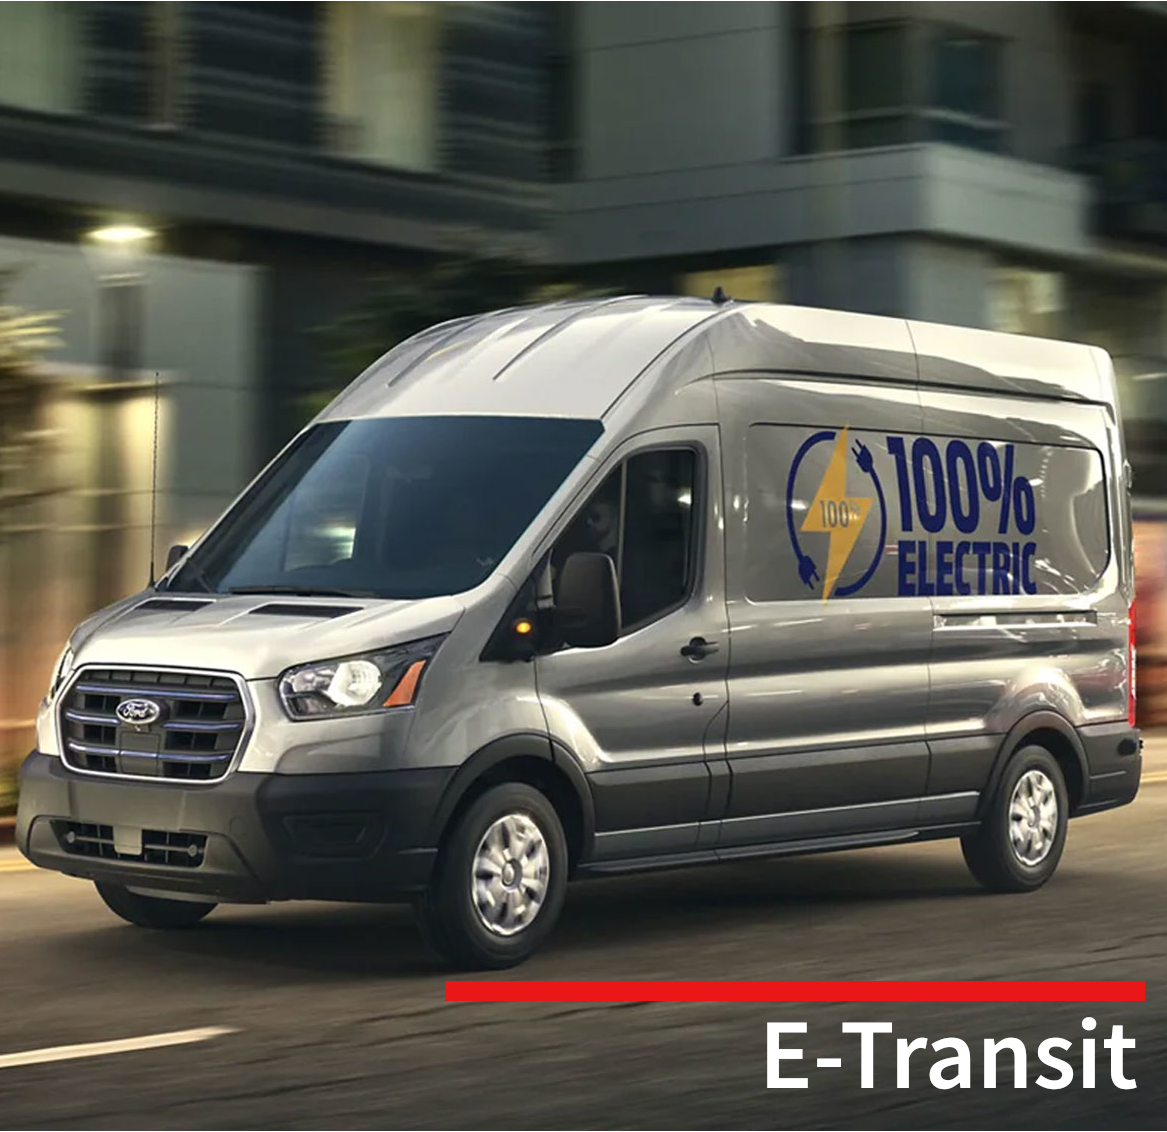 ford e-transit electric van for sale near me